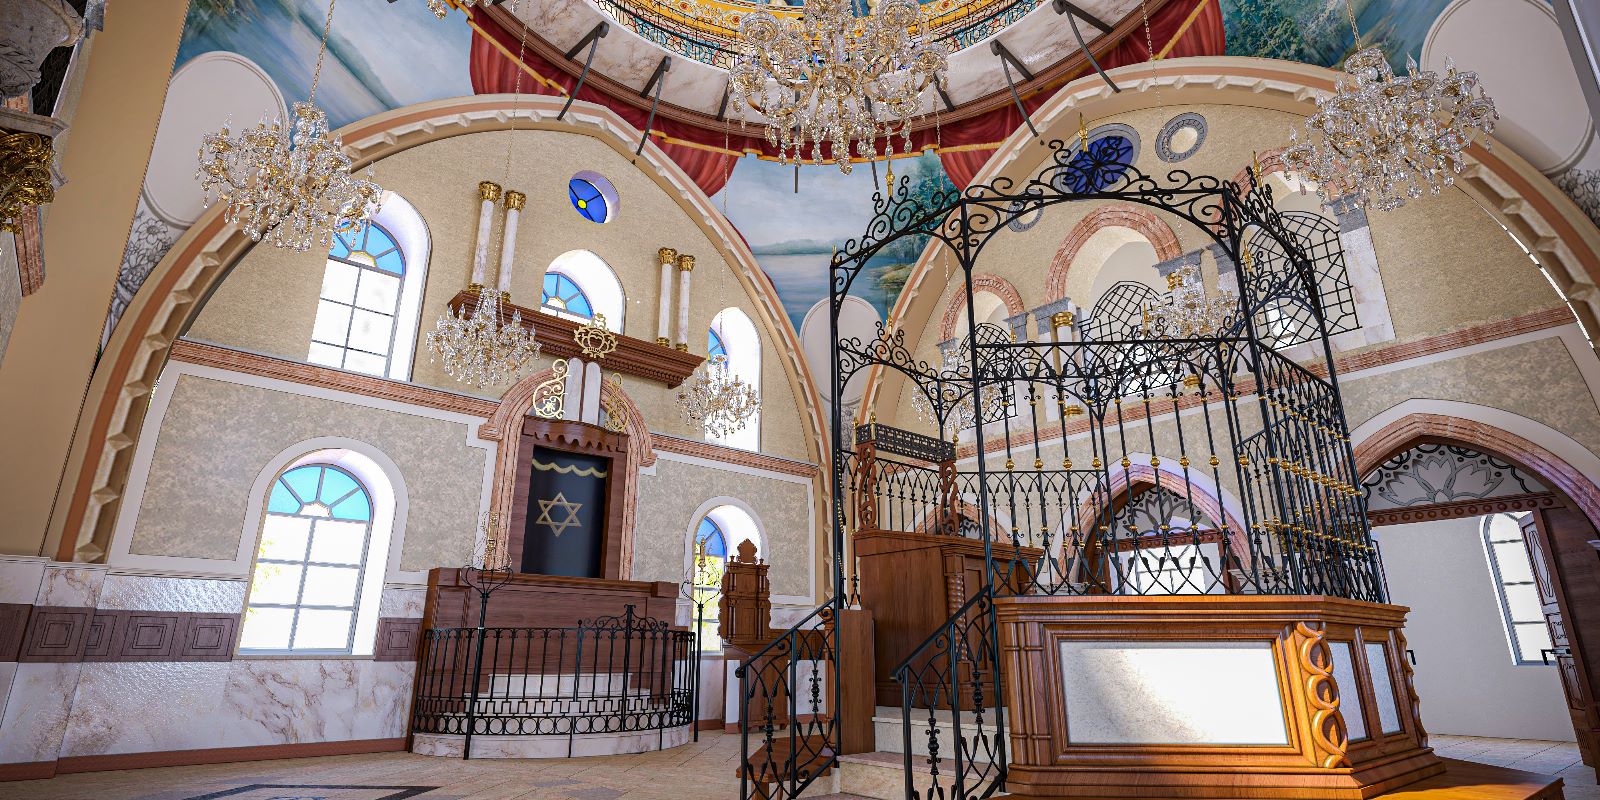 The interior of Tiferet Yisrael Synagogue in the Old City of Jerusalem. Credit: Courtesy.